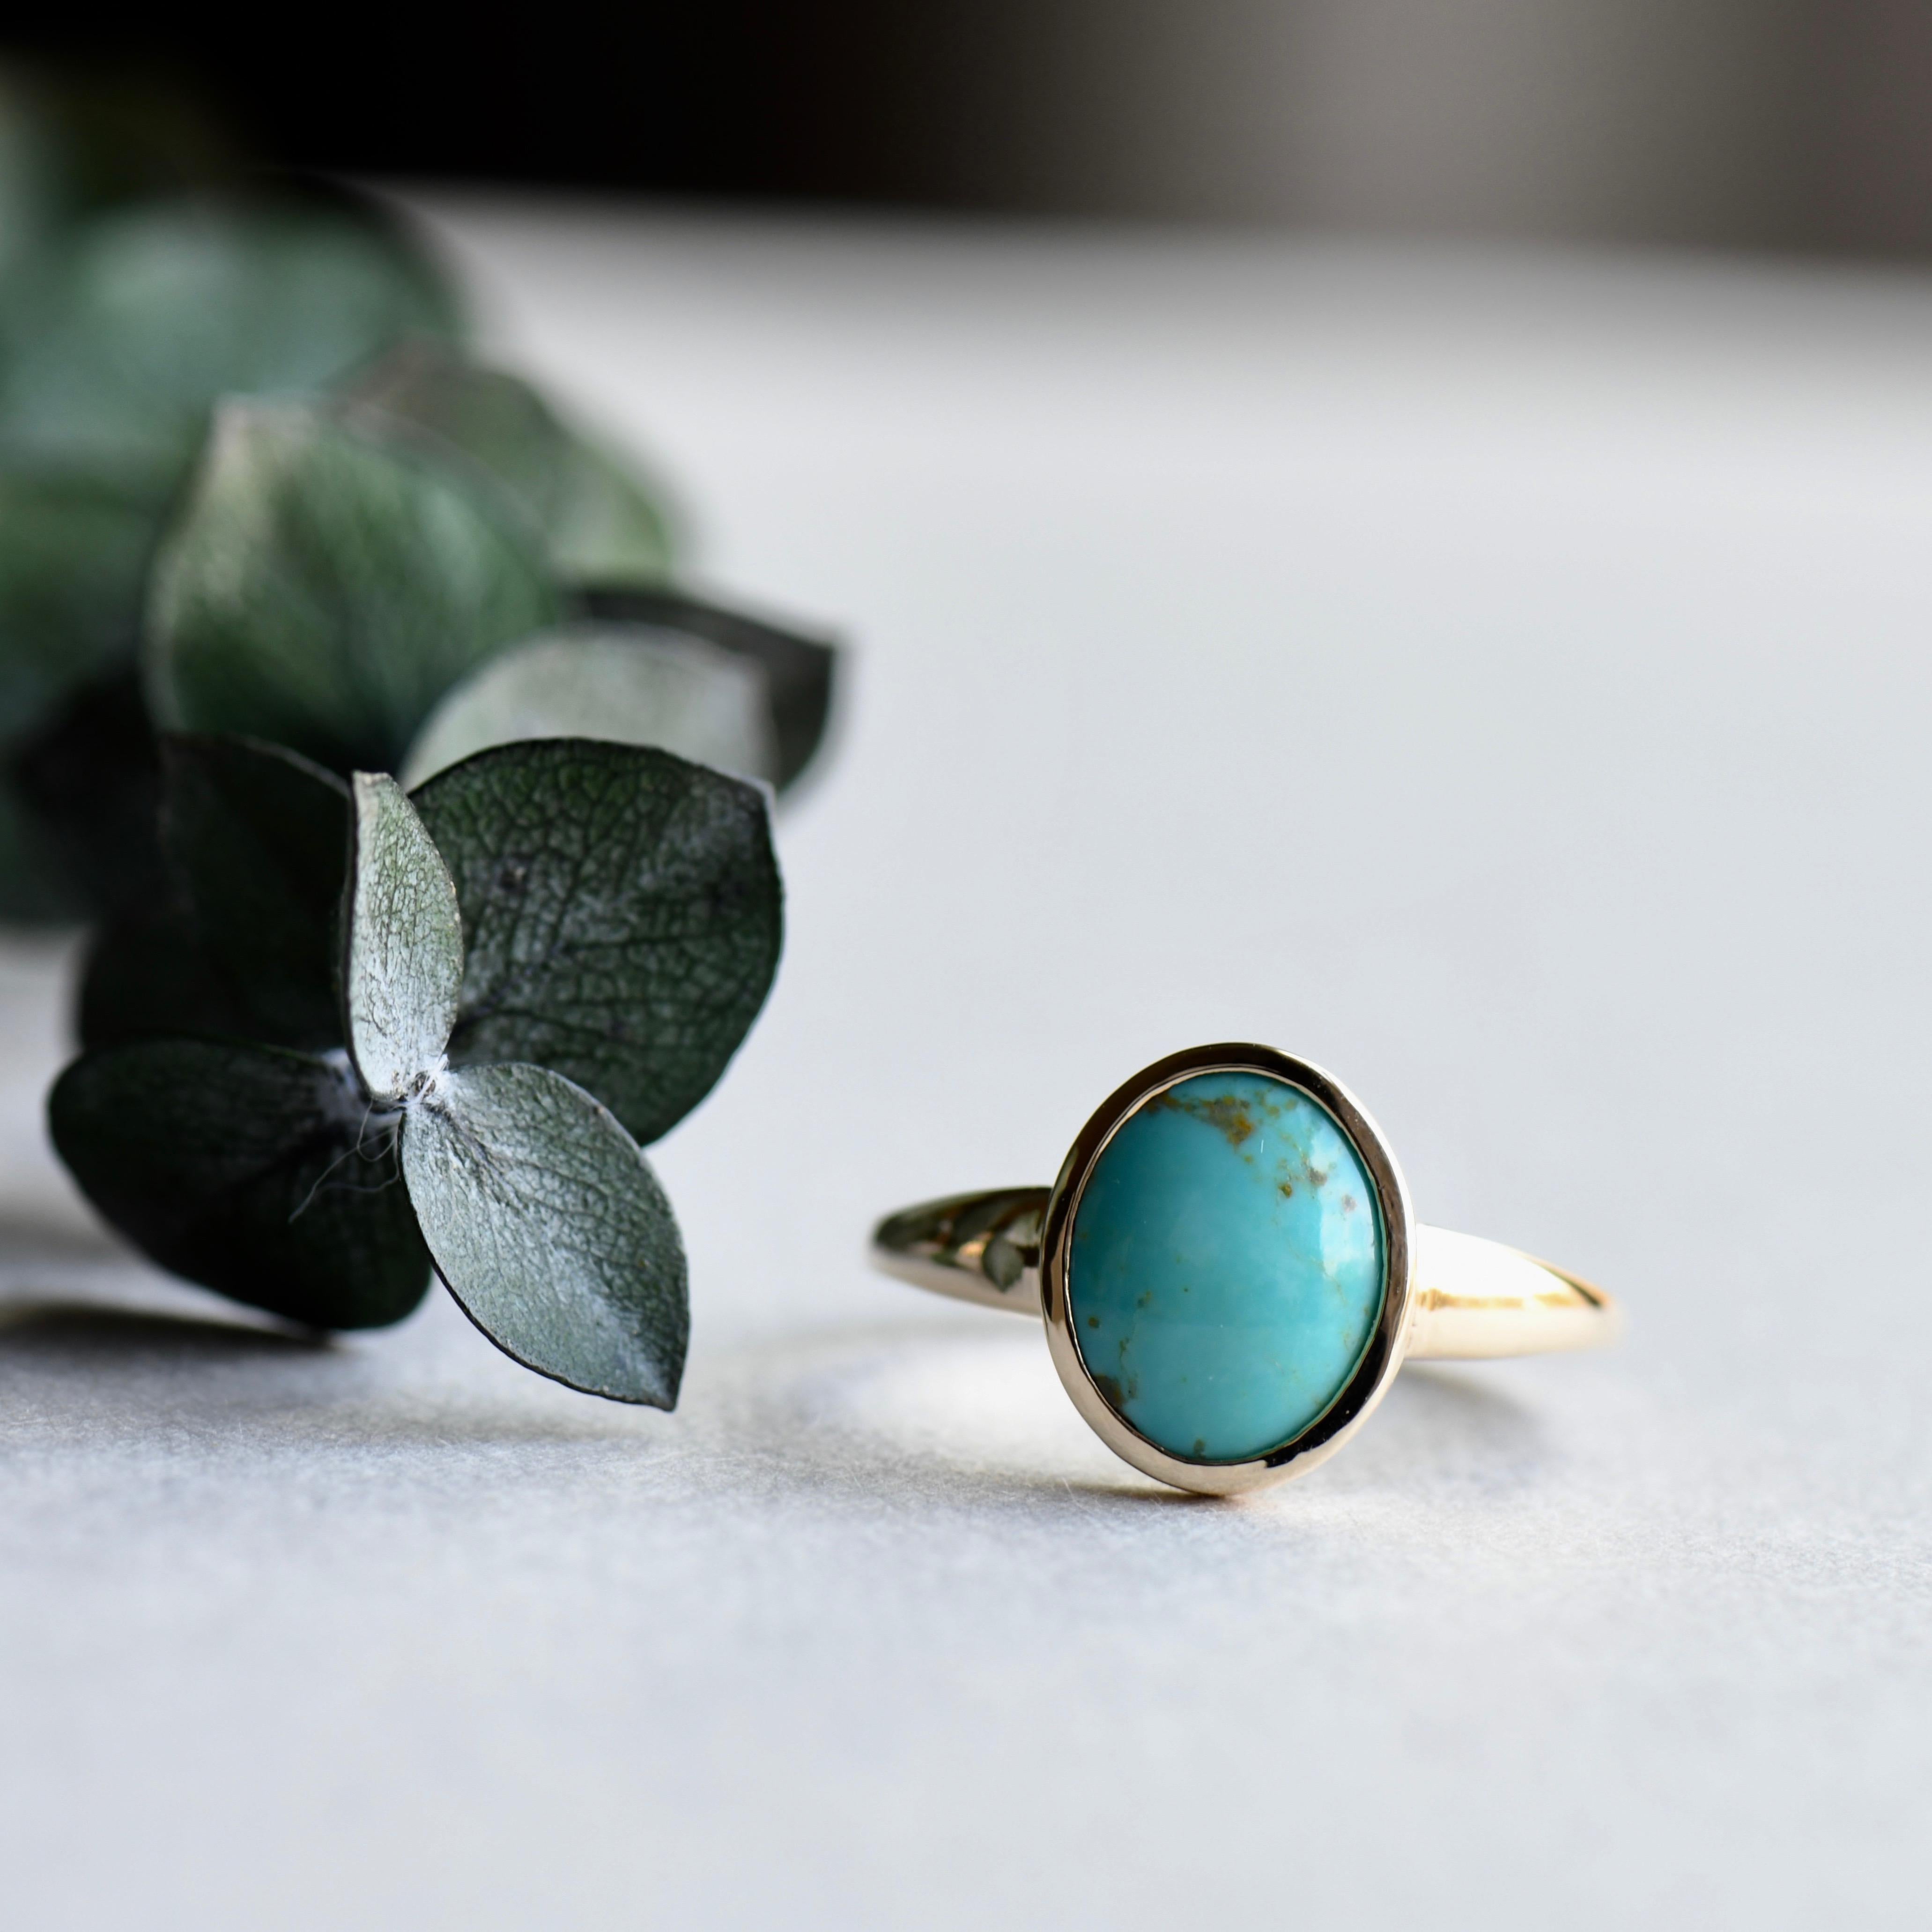 Simple American Mined blue turquoise set on 14k yellow gold.
Metal type:18 karat yellow gold
1.4mm band width. 
8mmX 10mm Genuine North American turquoise. 

All of our jewelry will arrive in custom packaging ready for gift giving. 

LEAD TIME:
Made